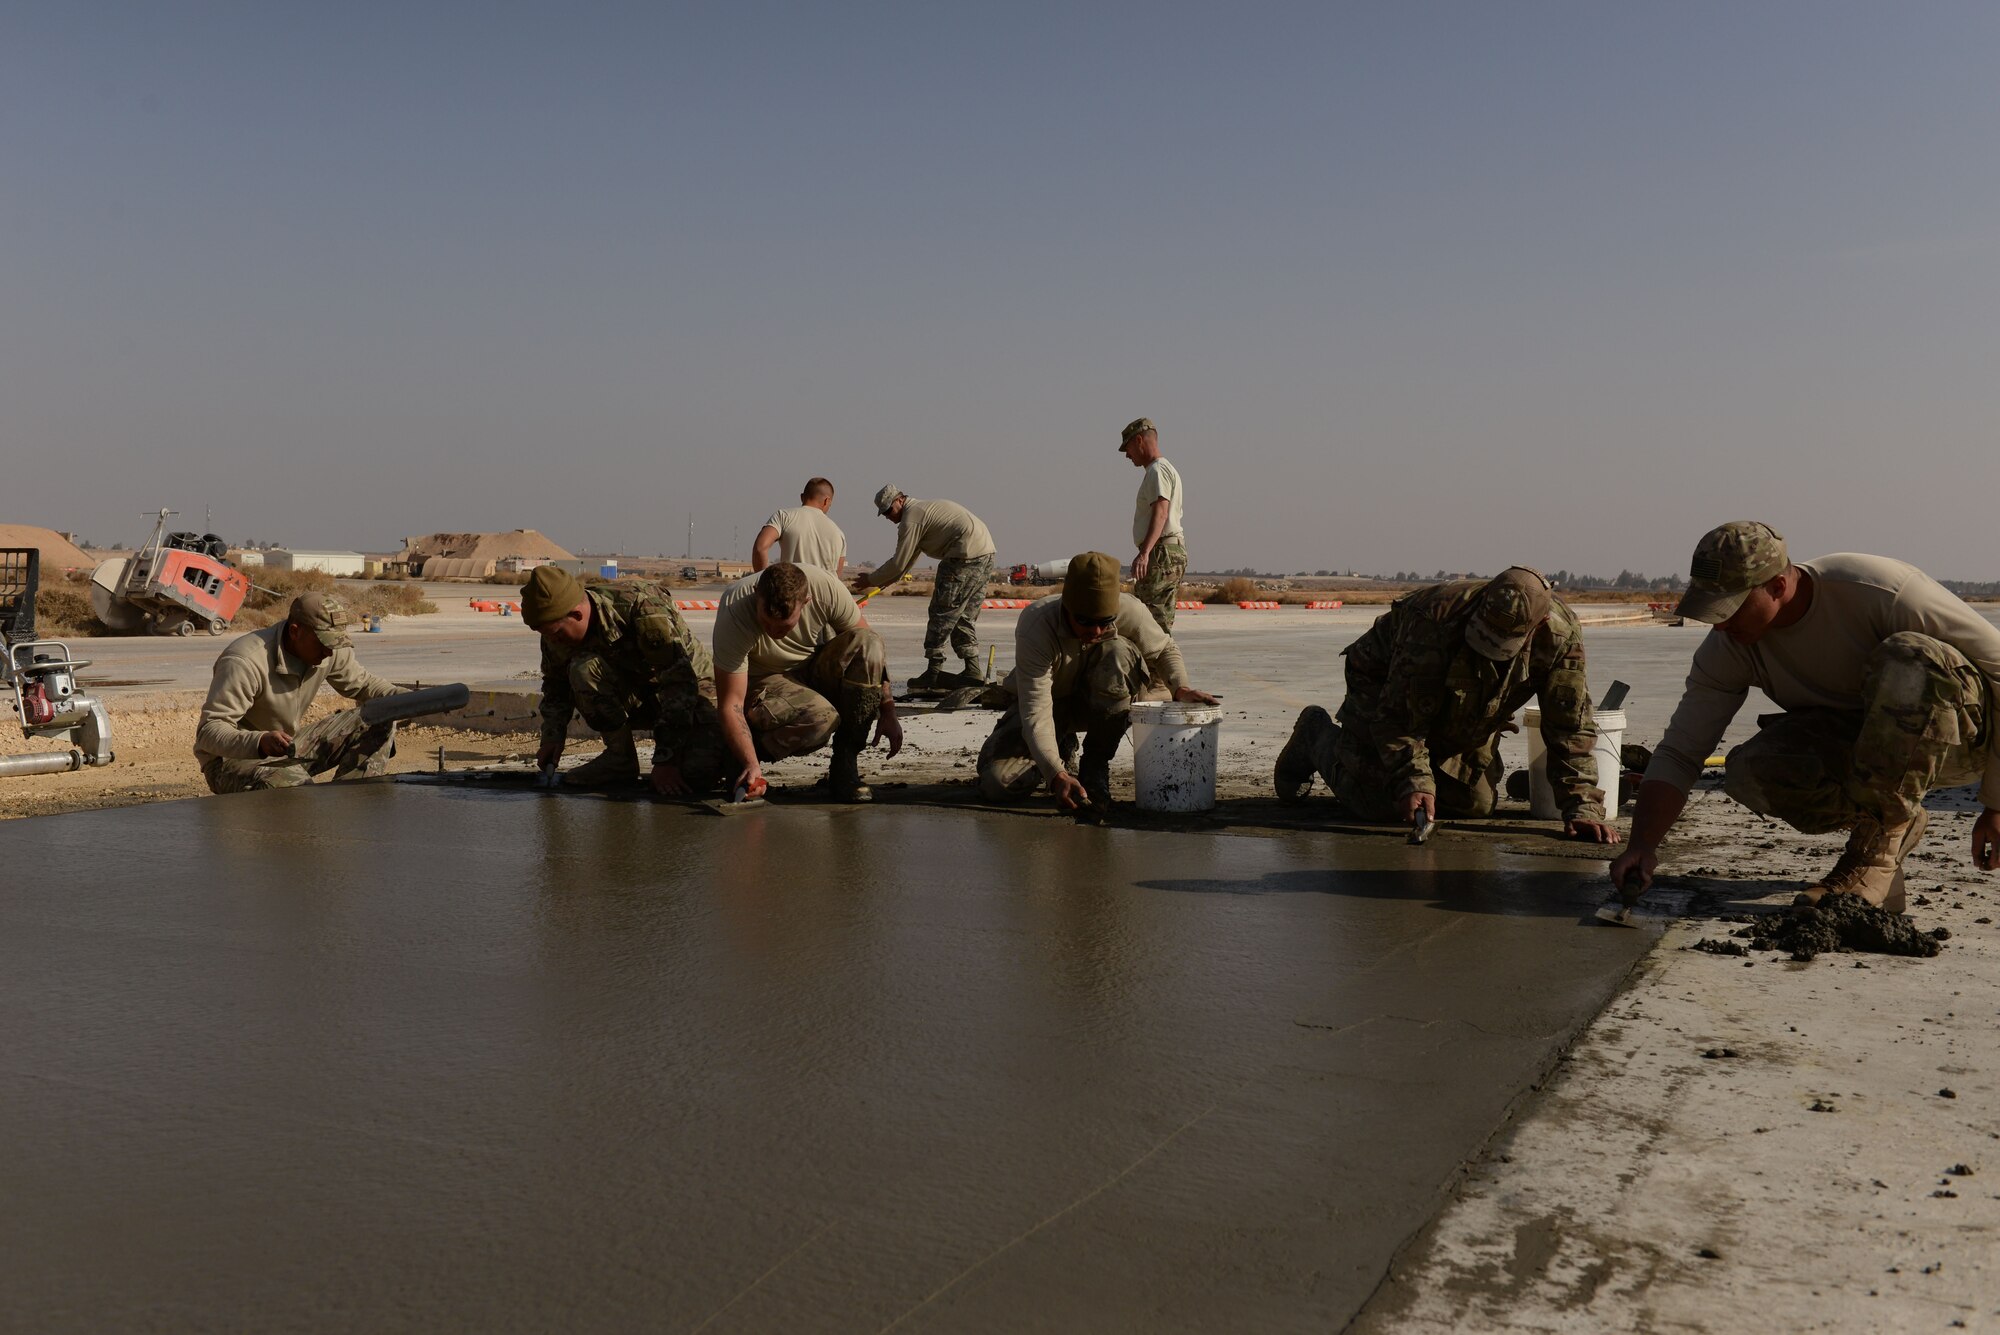 Airmen assigned to the 332nd Expeditionary Civil Engineer Squadron smooth out the edges of a concrete slab before covering it with burlap and tarp so that it will dry correctly without debris at an undisclosed location in Southwest Asia Nov. 28, 2017. During the last two weeks, Air National Guardsmen and active duty personnel, laid 1,000 yards of concrete, repaired 60 slabs and 425 spalls in order to keep the flight line ready for U.S. and Coalition forces flying sorties. (U.S. Air Force photo by Senior Master Sgt. Cohen A. Young)